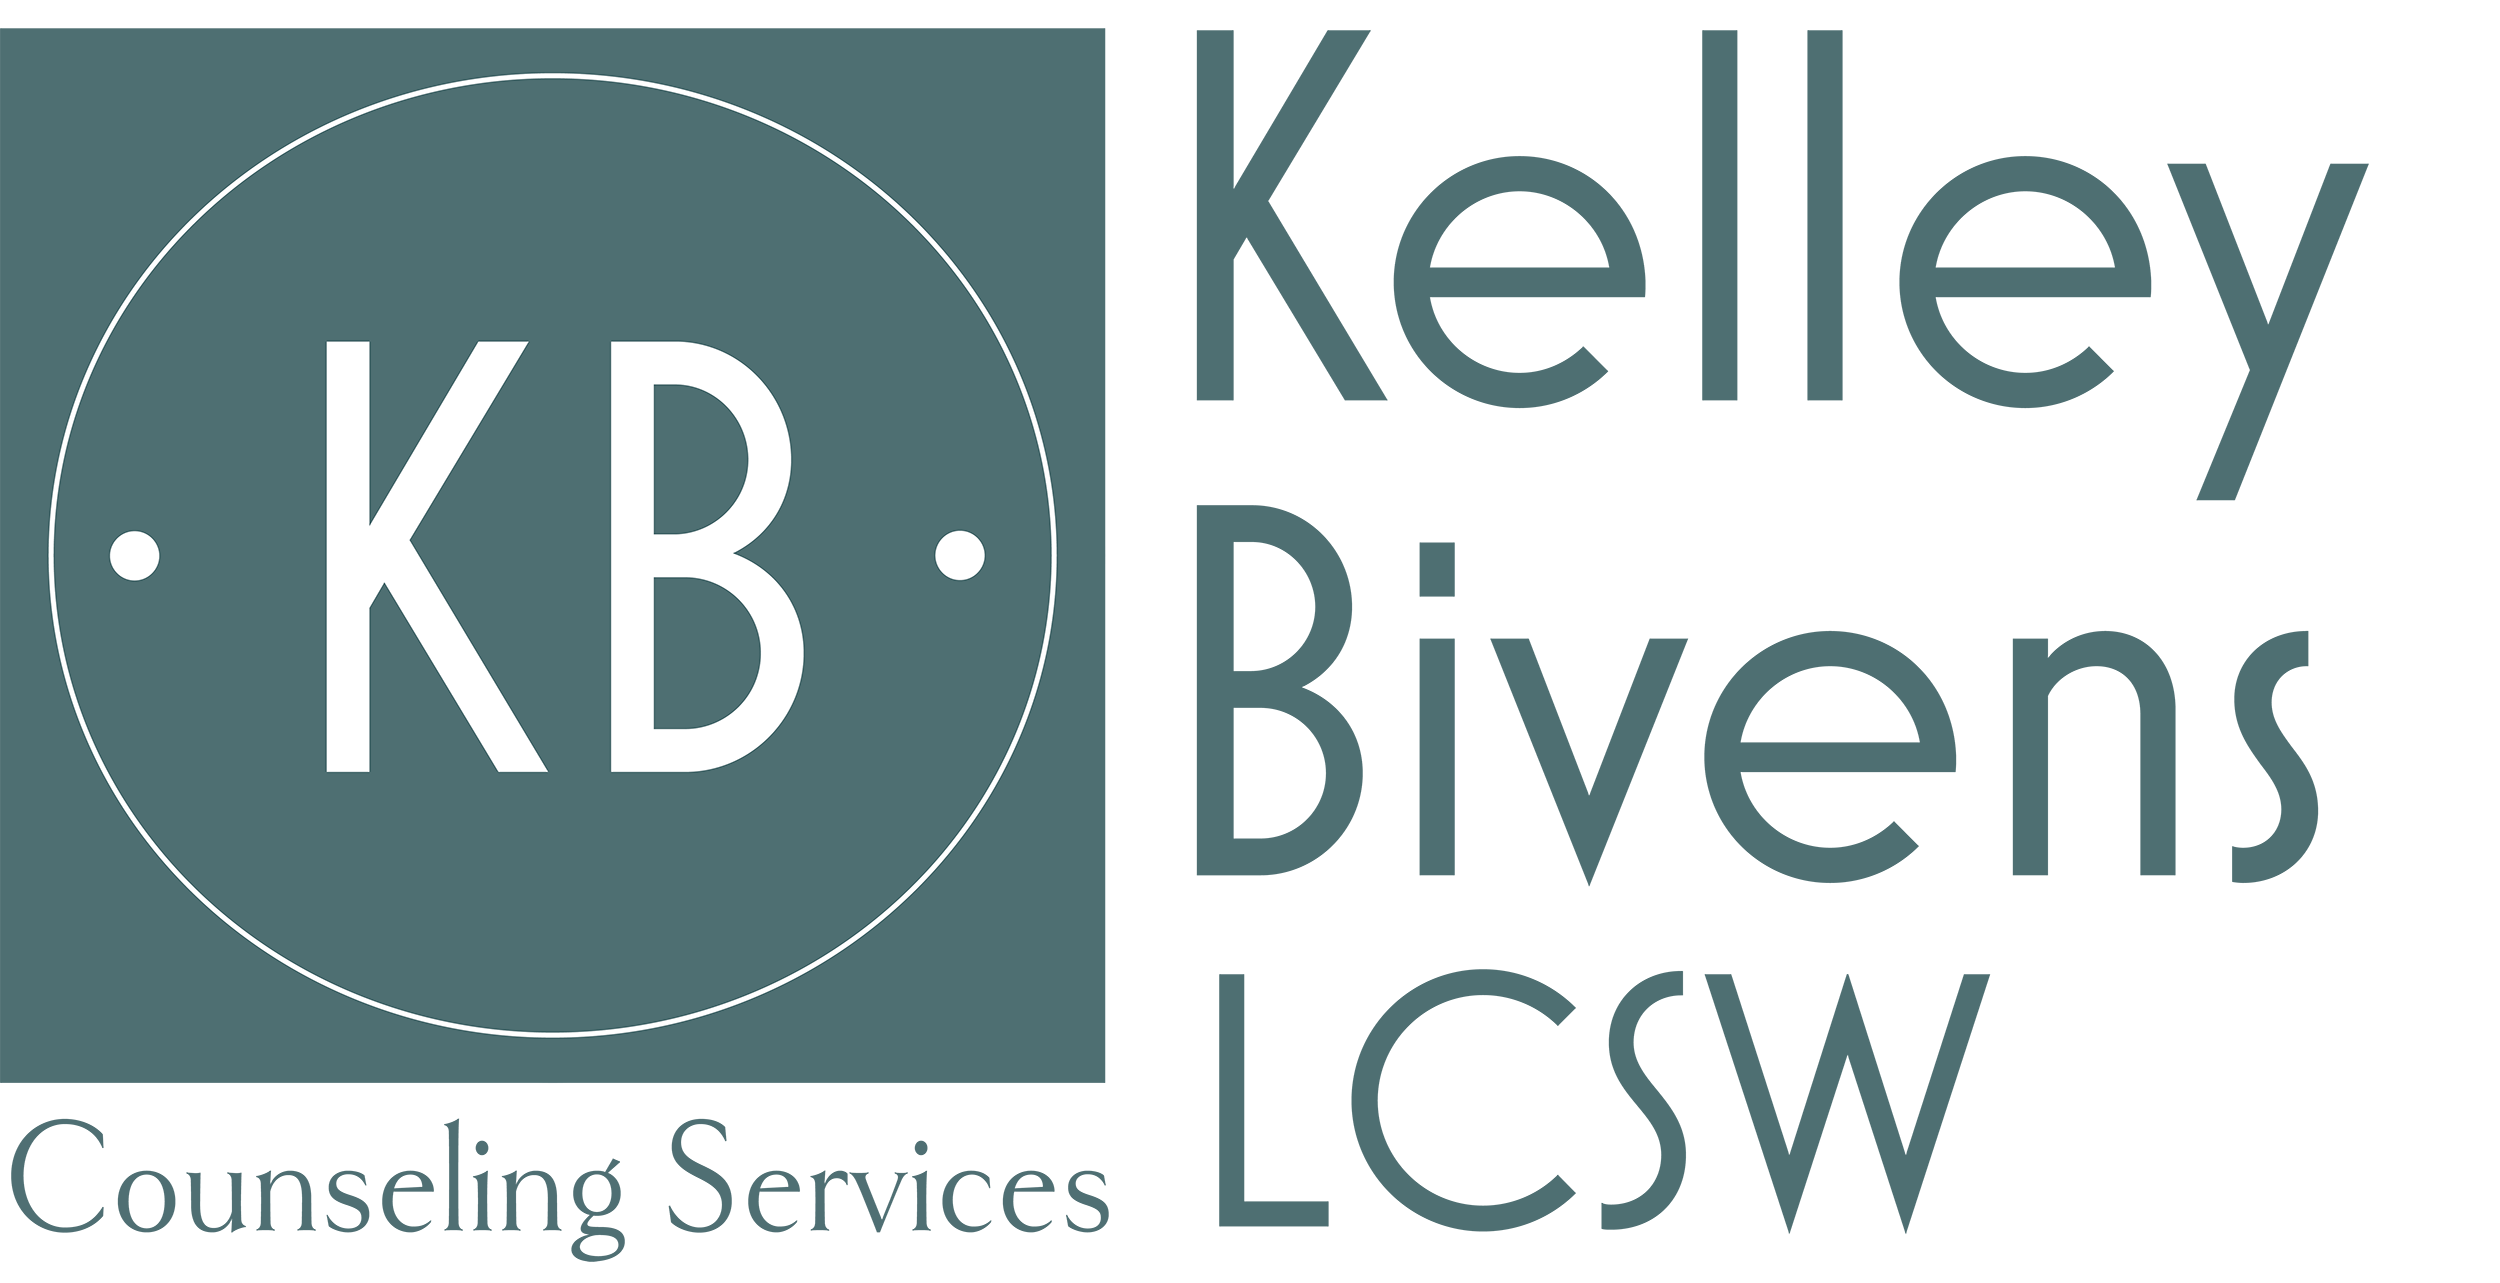 Kelley Bivens, LCSW